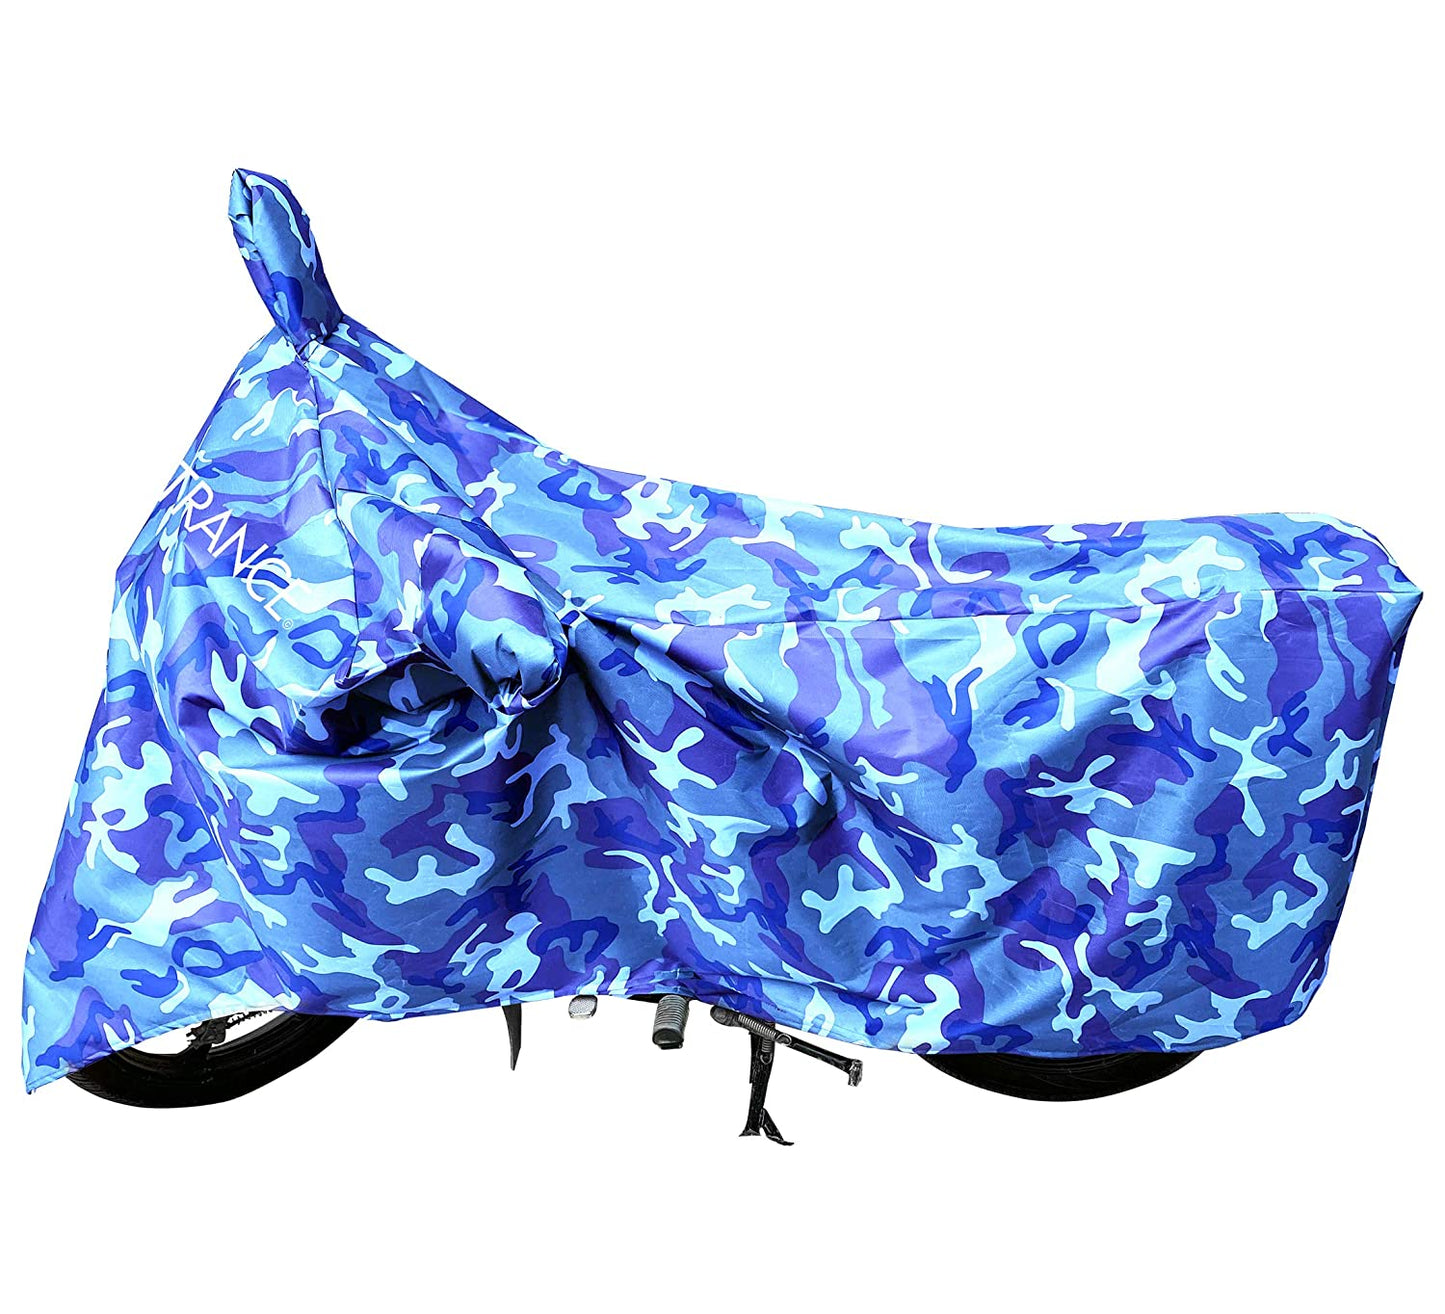 MotoTrance Jungle Bike Body Covers For 22Motors Flow - Interlock-Stitched Waterproof and Heat Resistant with Mirror Pockets